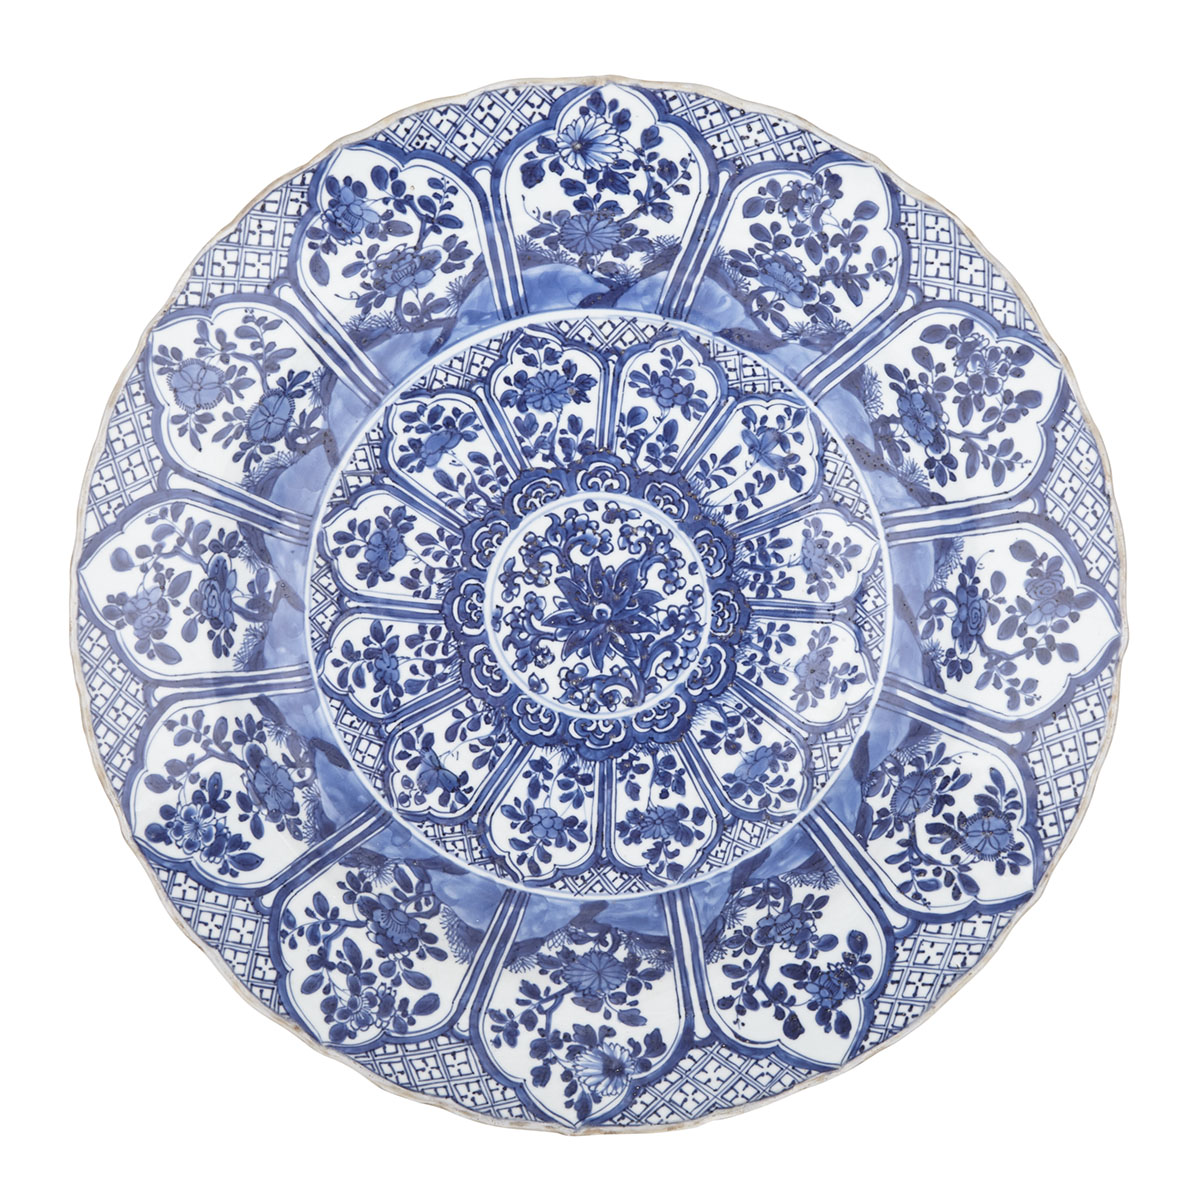 A Large Blue and White Charger, Mark and of Kangxi Period (1662-1722)